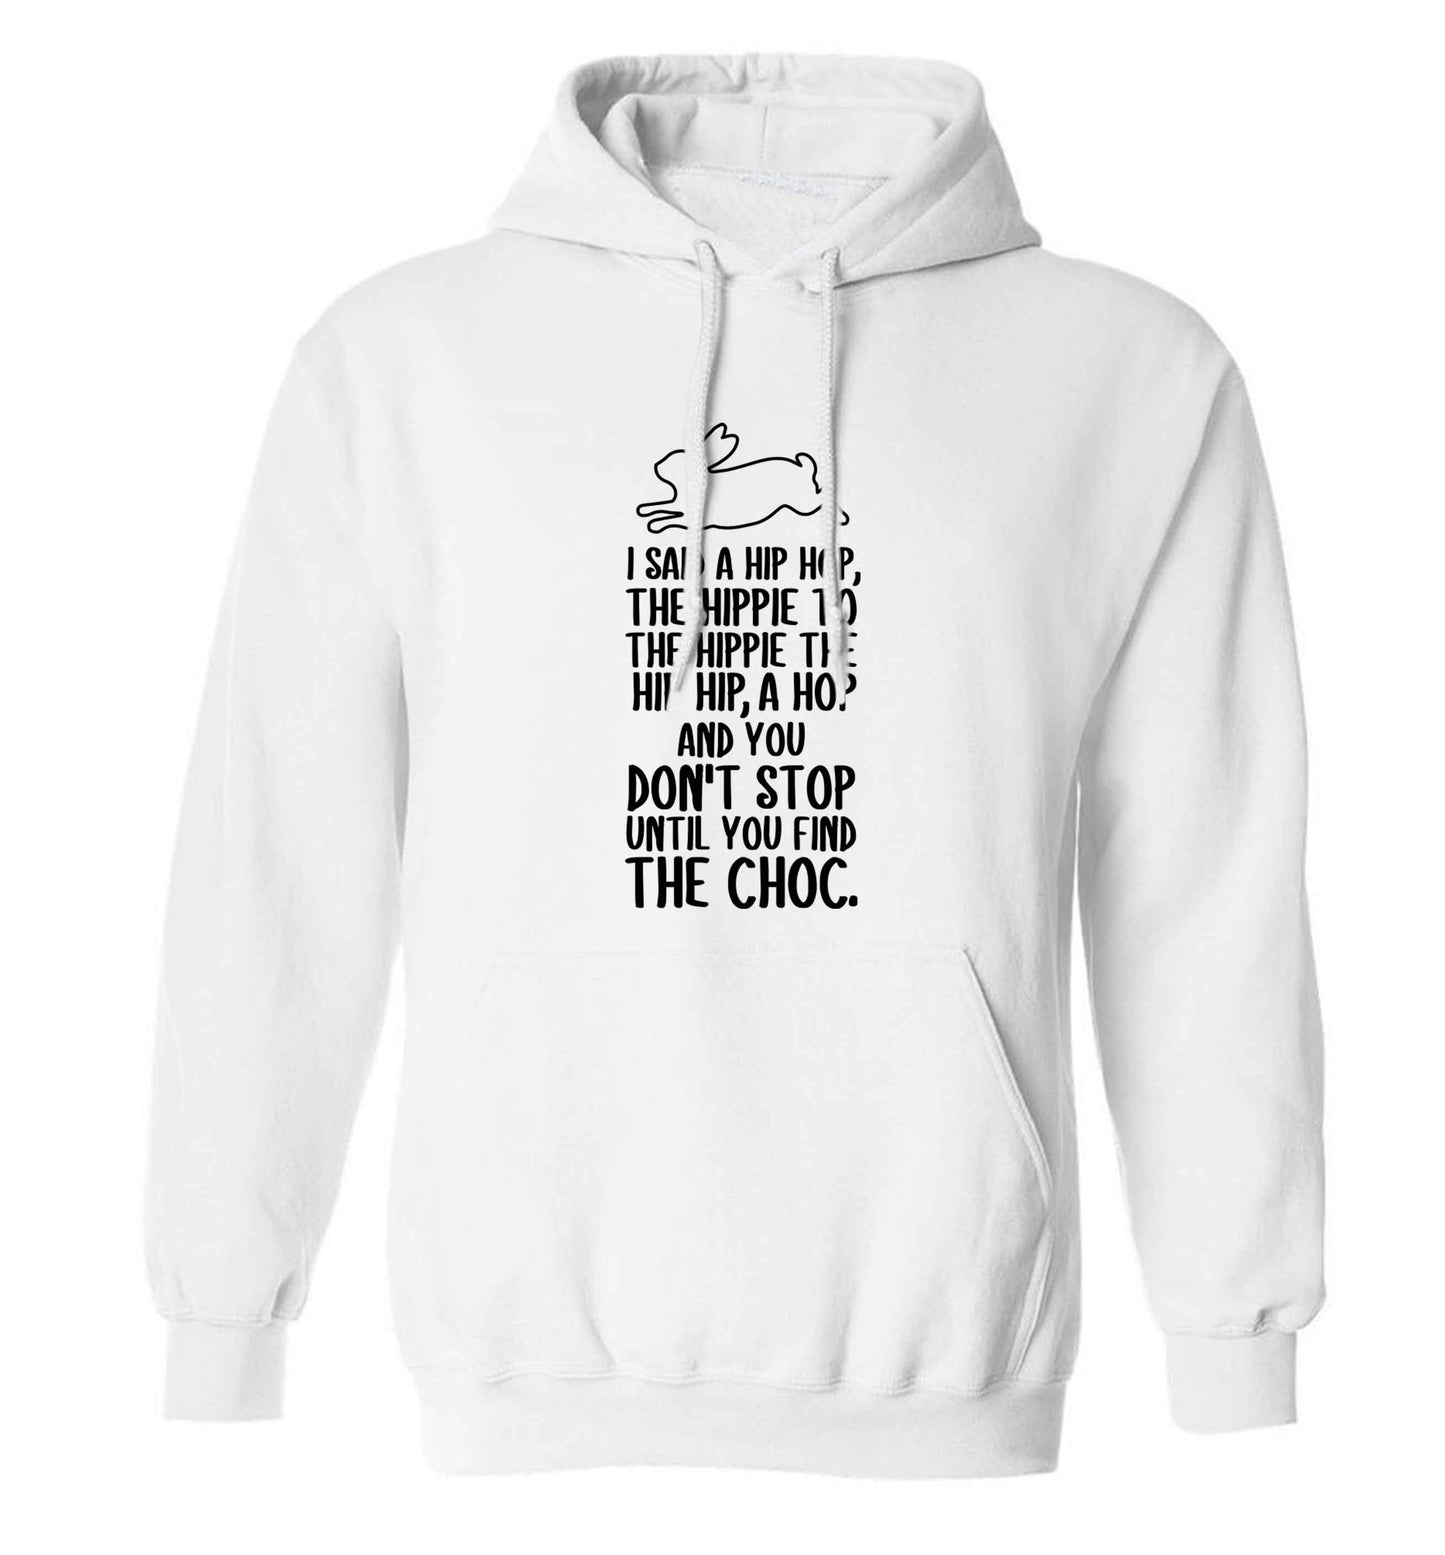 Don't stop until you find the choc adults unisex white hoodie 2XL